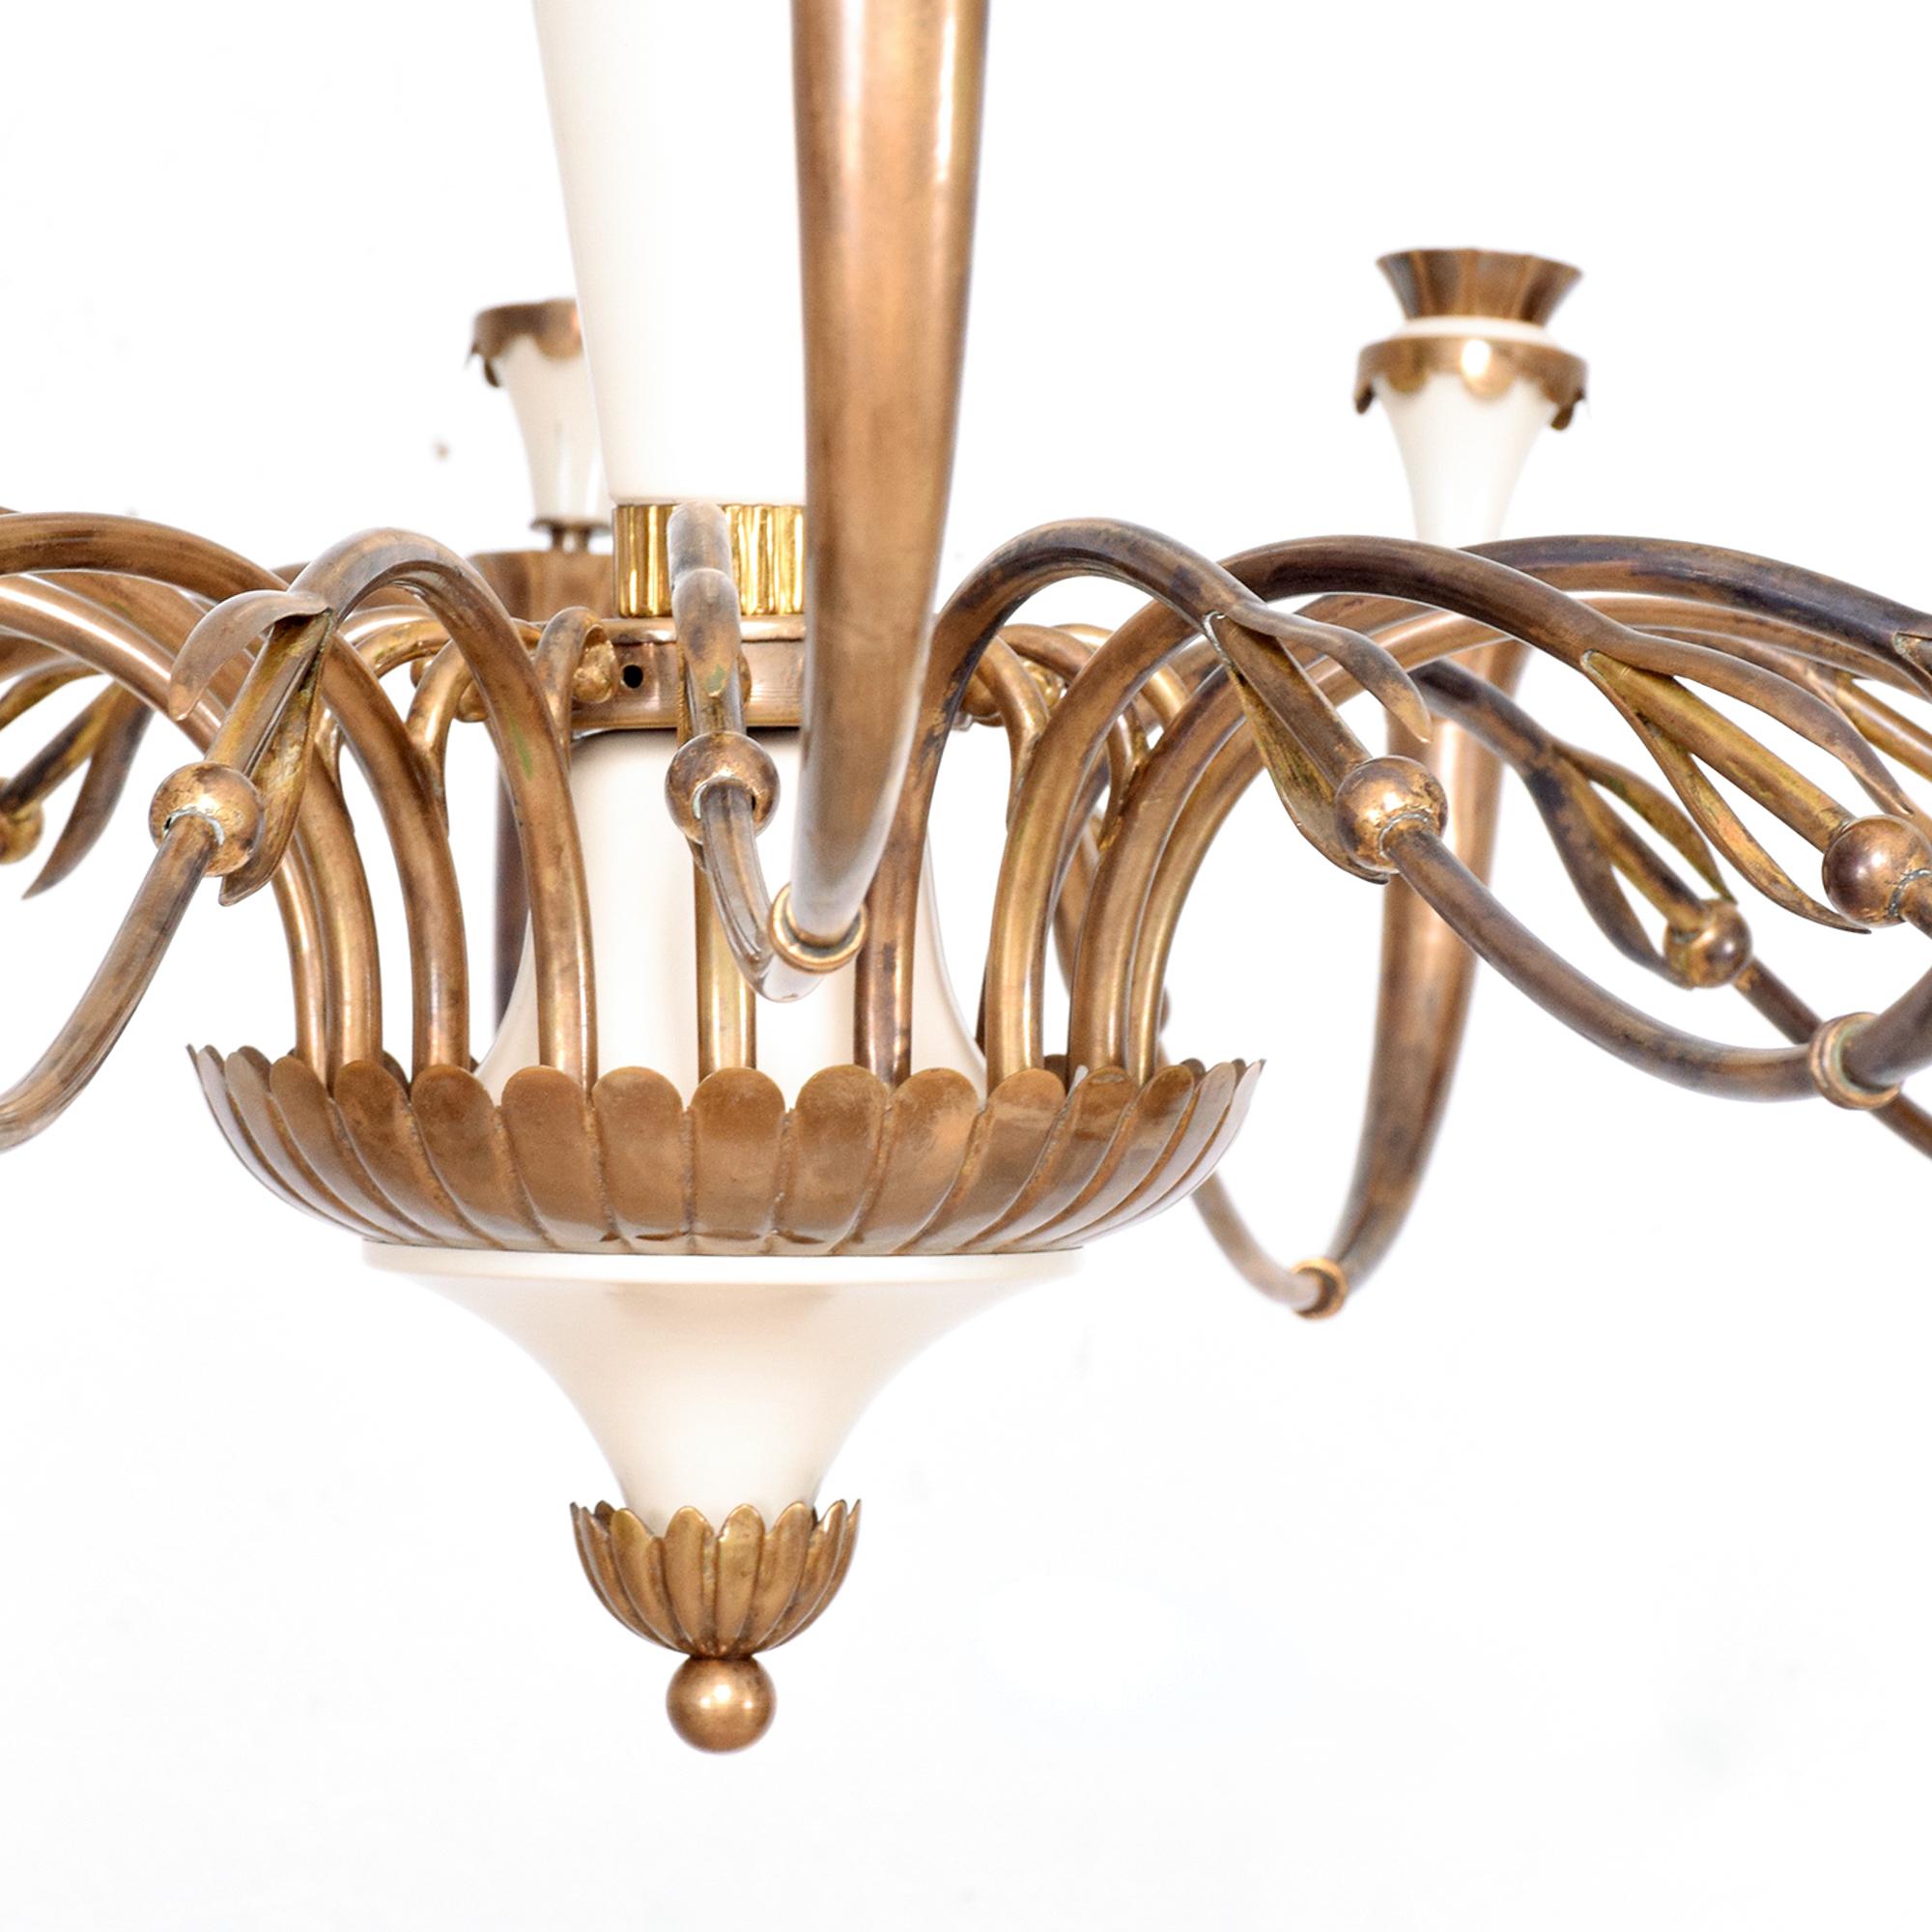 Chandelier
Sixteen (16) arm Sculptural Scallop Italian chandelier ITALY 1950s
Unmarked
Painted aluminum and patinated brass
Dimensions: 42.5in diameter x 25 tall. Decorative brass chain approximately 46 tall.
Similar to the designs of Guglielmo